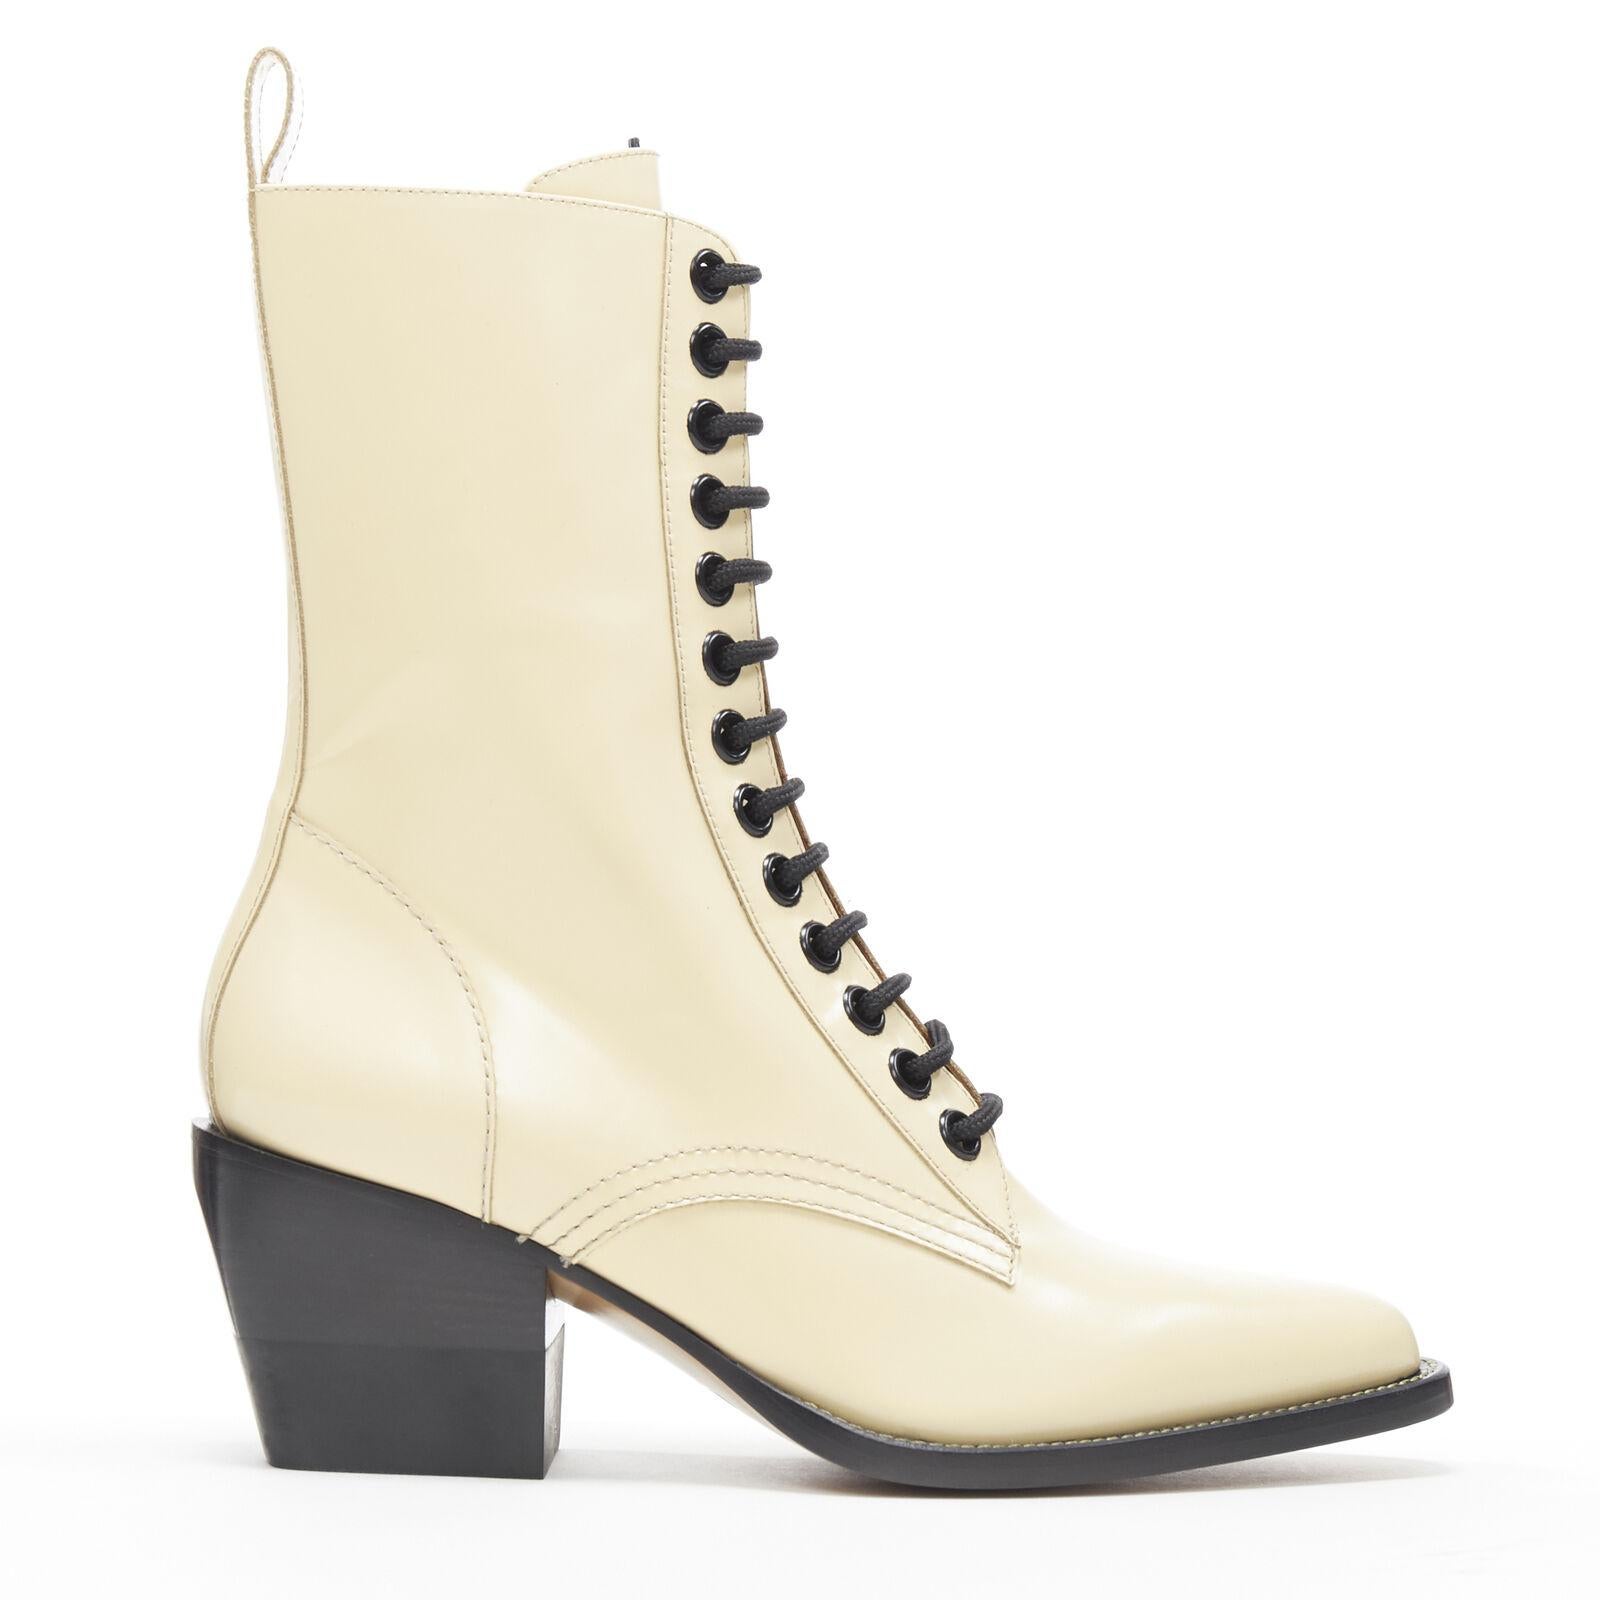 new CHLOE Runway Rylee beige leather lace up block heel pointed toe boot EU39.5
Reference: TGAS/A05616
Brand: Chloe
Model: Rylee
Collection: Runway
Material: Leather
Color: Beige
Pattern: Solid
Closure: Lace Up
Extra Details: Signature Runway Rylee